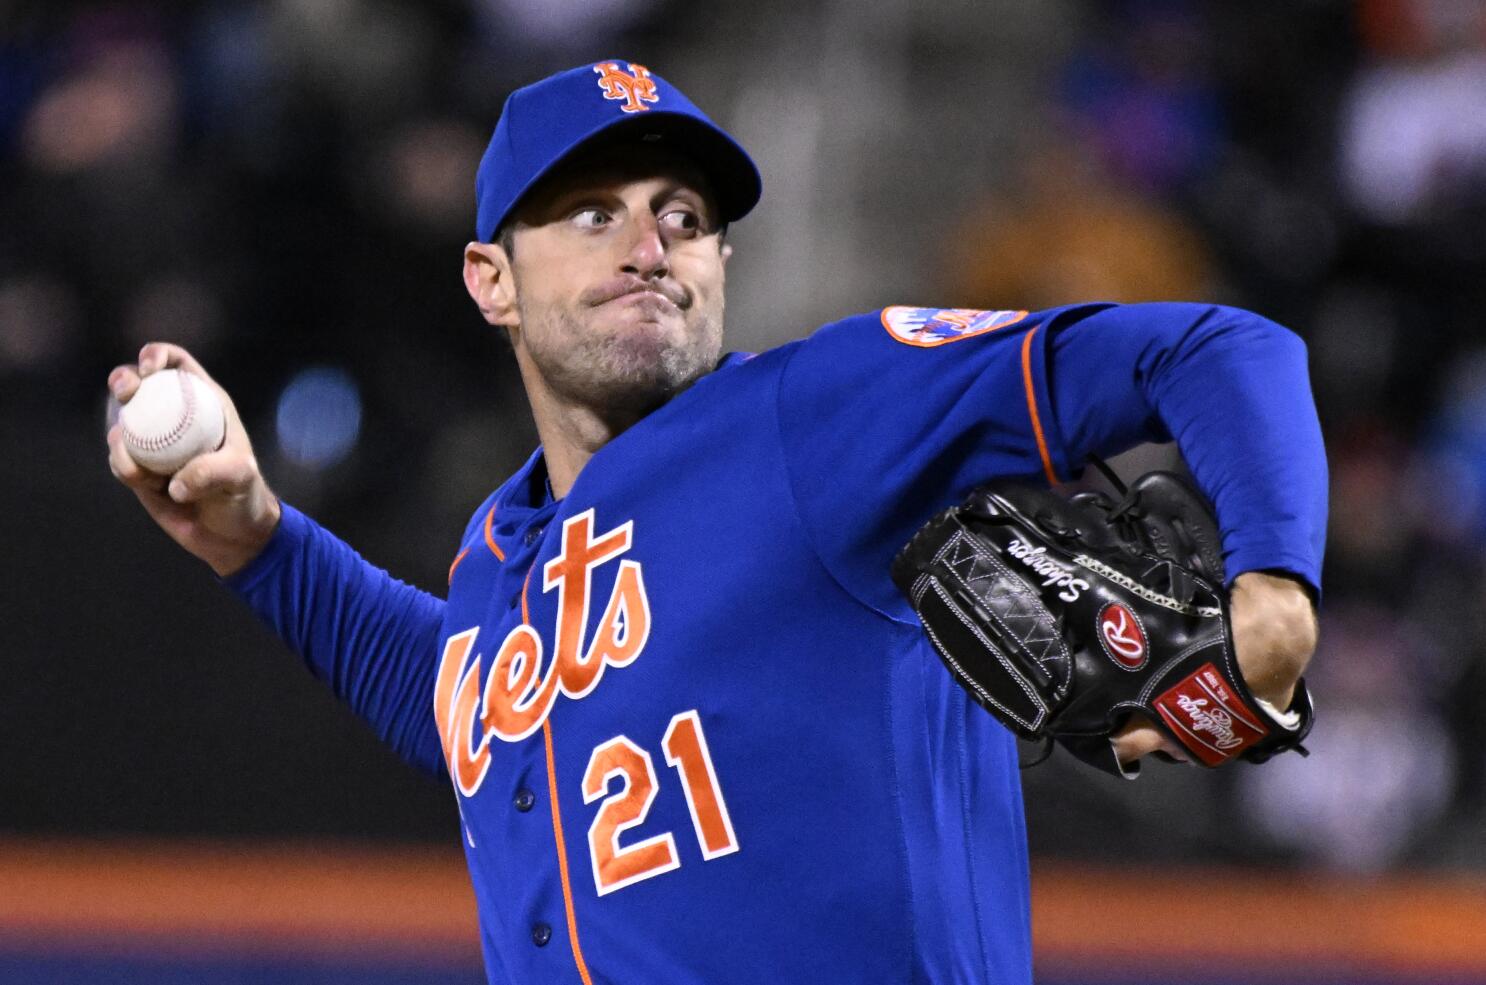 NY Mets vs. Padres: NL Wild Card series 2022 schedule, preview